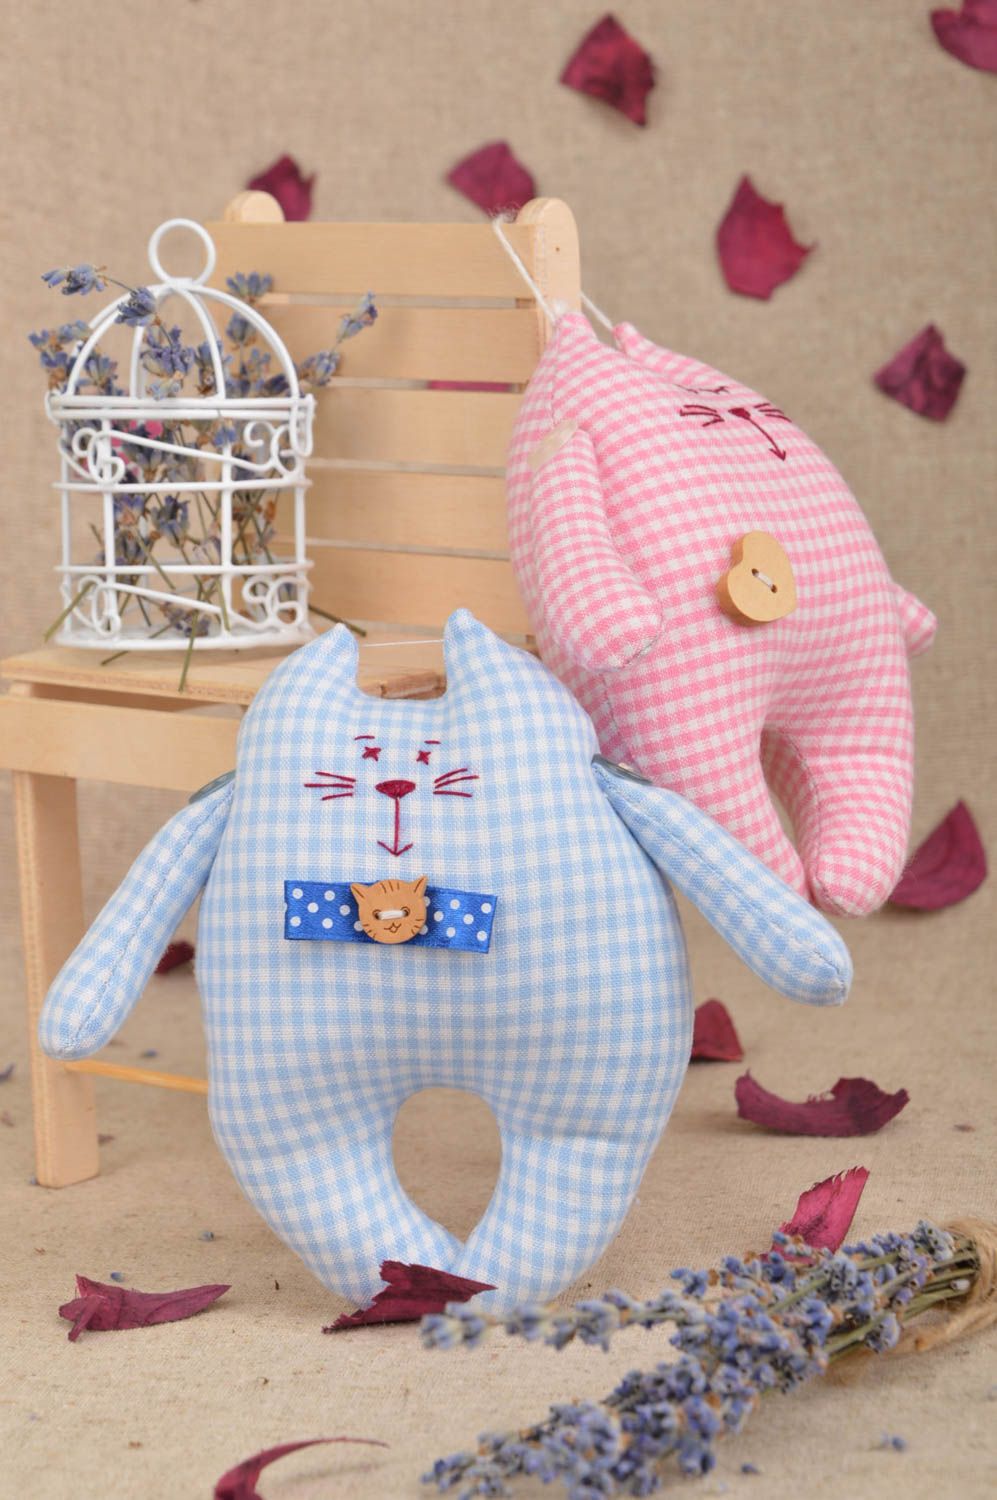 Handmade childrens soft toys beautiful stuffed toys for kids 2 pieces gift ideas photo 1